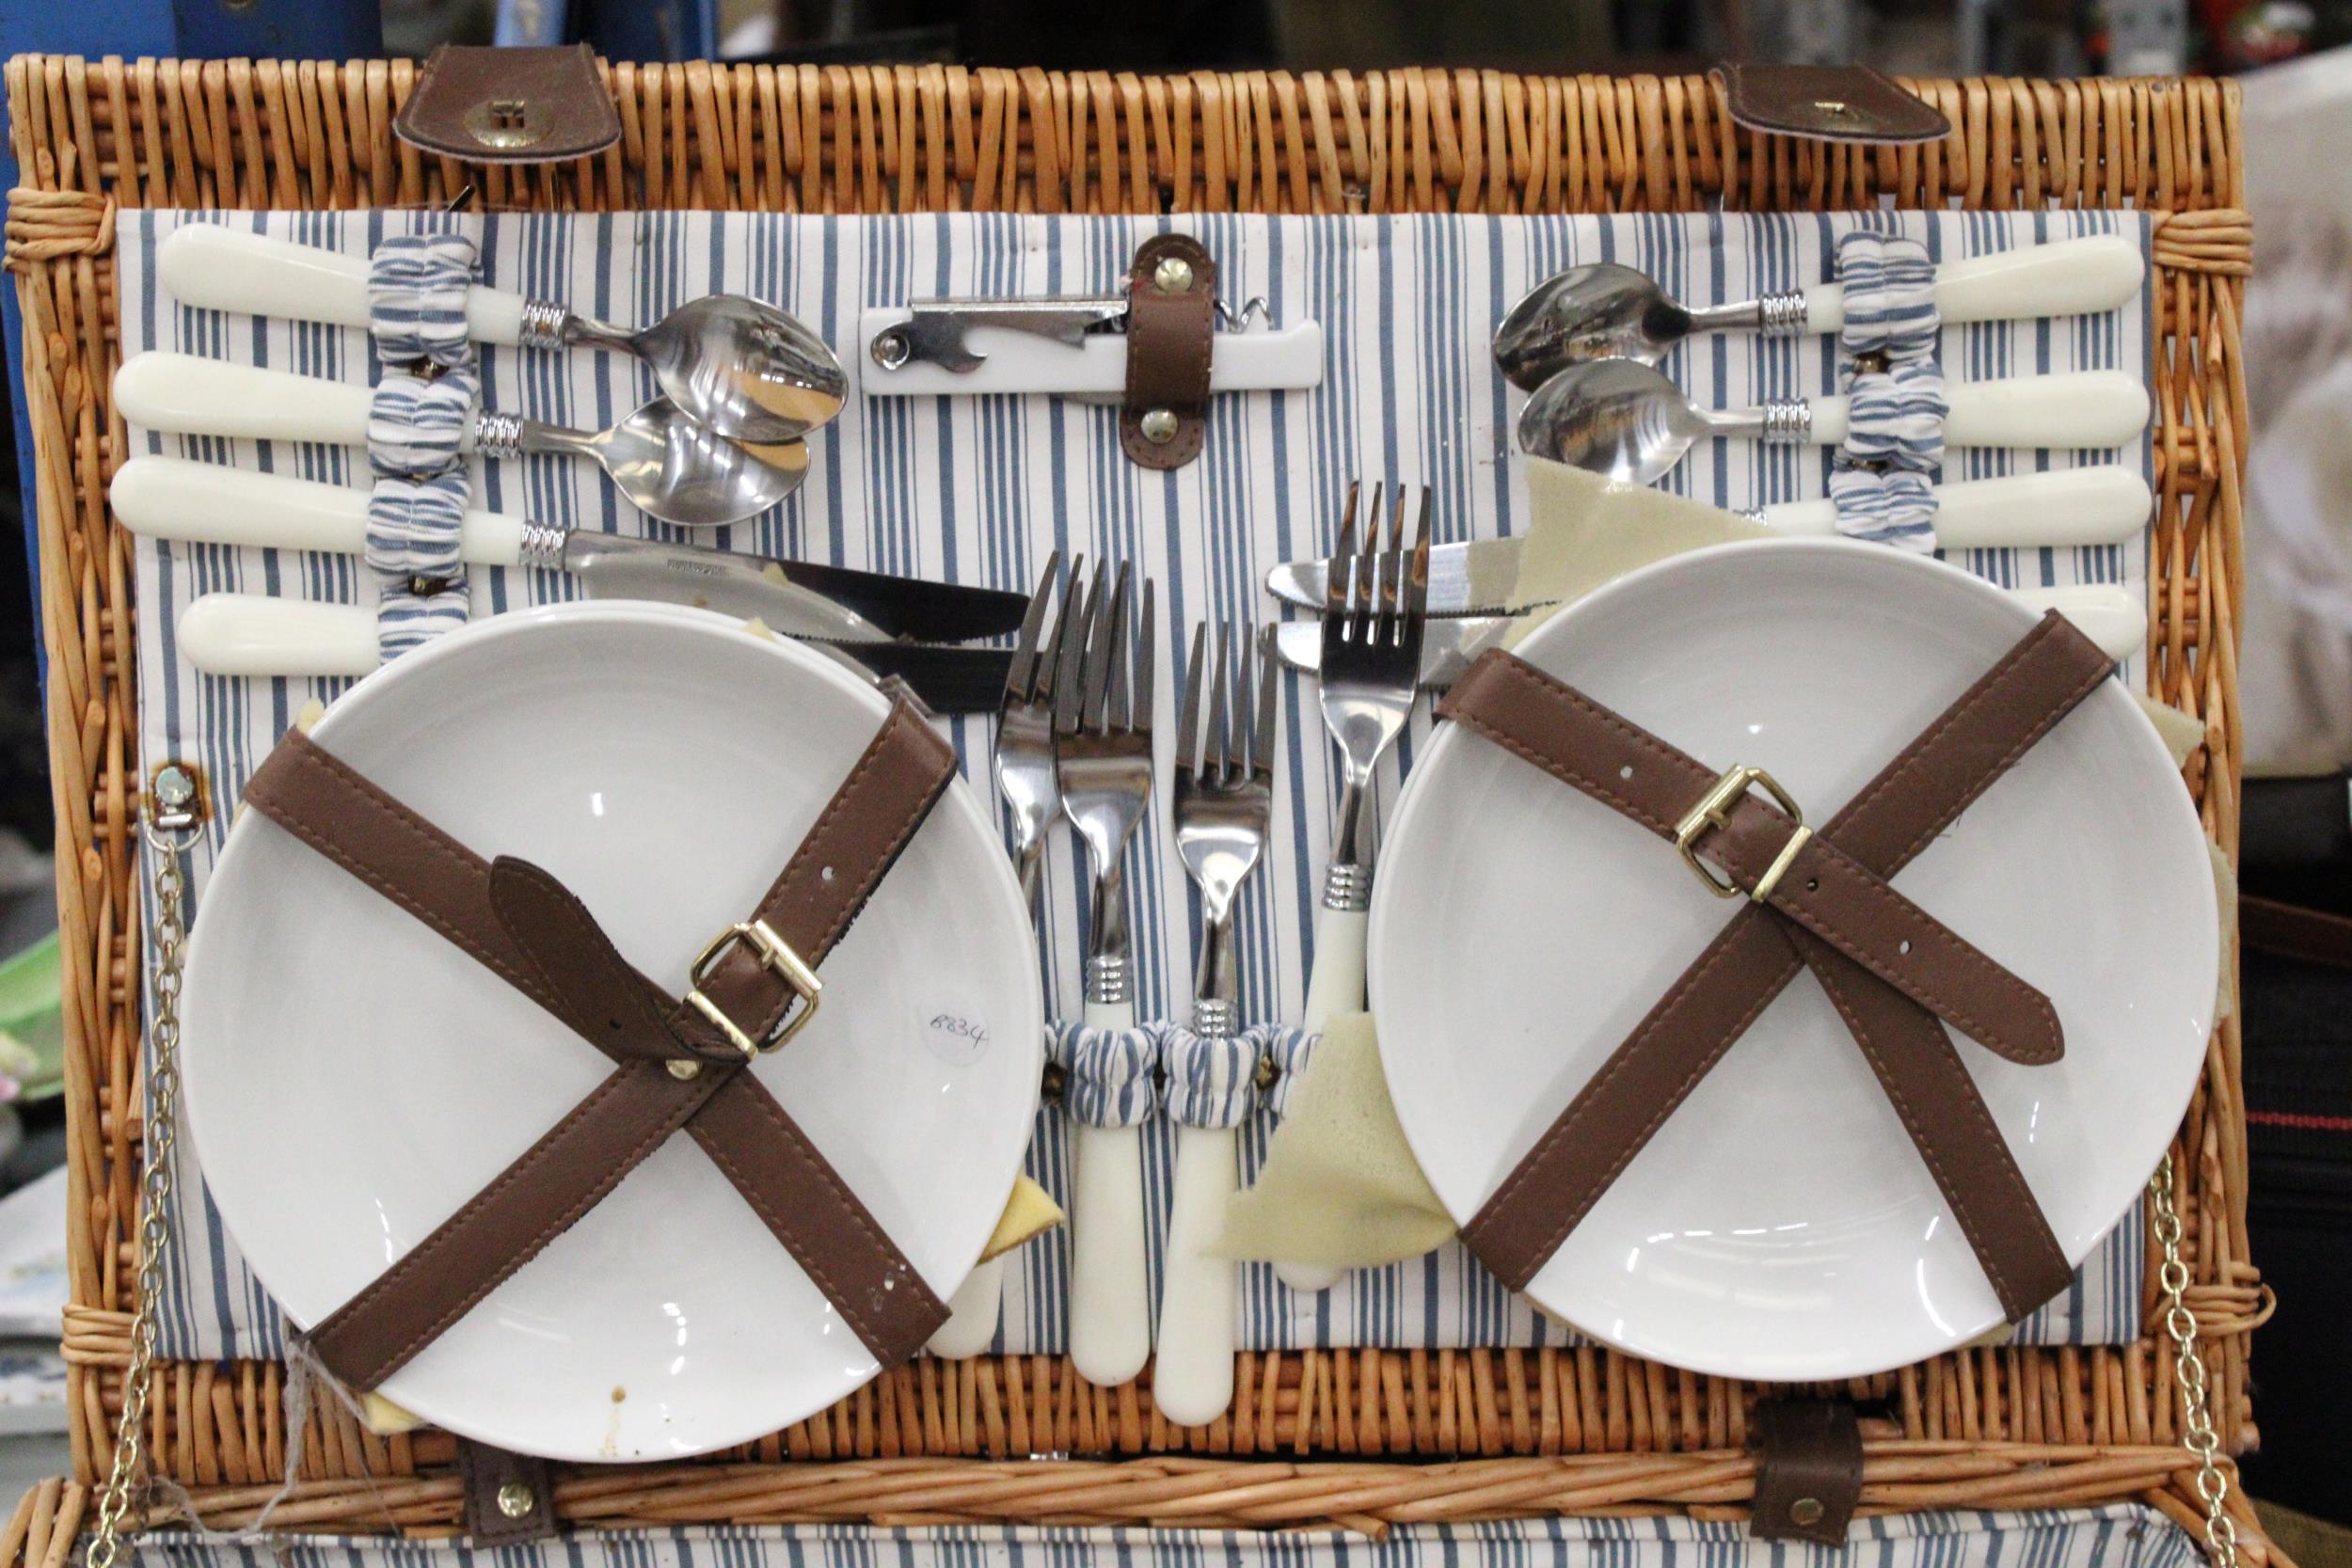 A LARGE WICKER PICNIC HAMPER CONTAINING CERAMIC CUPS AND PLATES, PLUS CUTLERY, A BOTTLE OPENER AND - Image 2 of 5